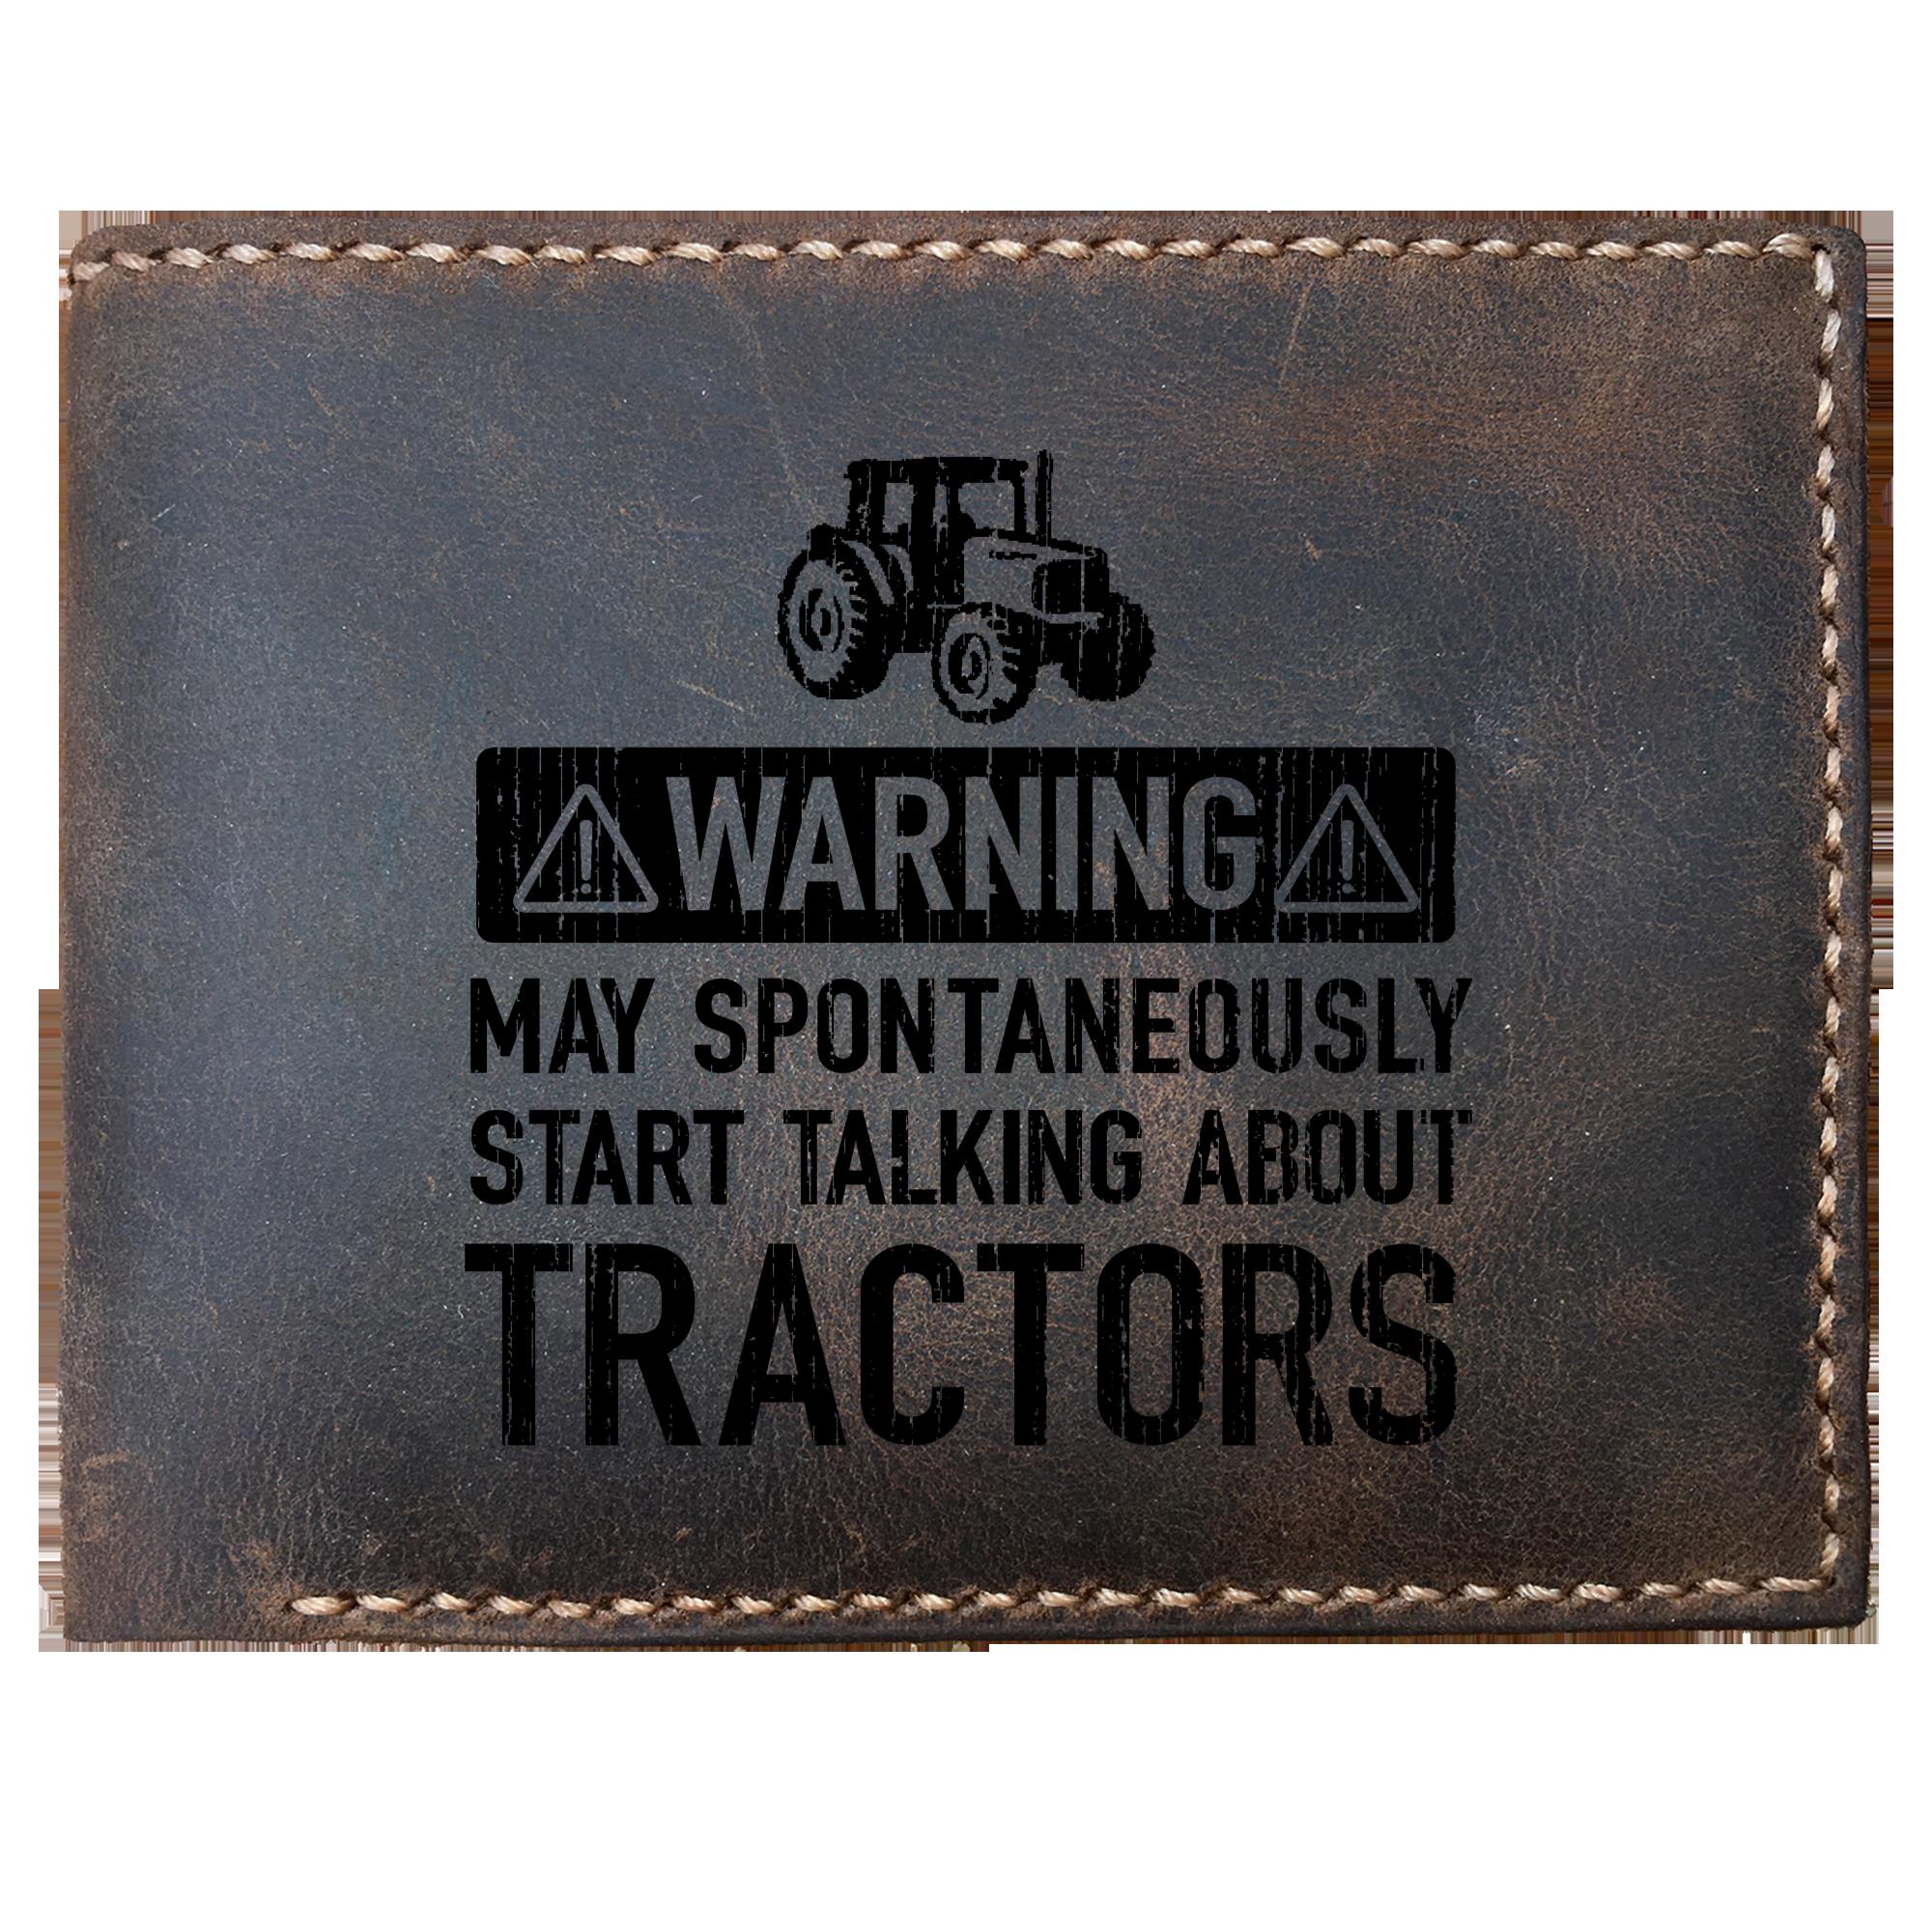 Skitongifts Funny Custom Laser Engraved Bifold Leather Wallet For Men, Funny For Farmers Warning May Spontaneously Start Talking About S